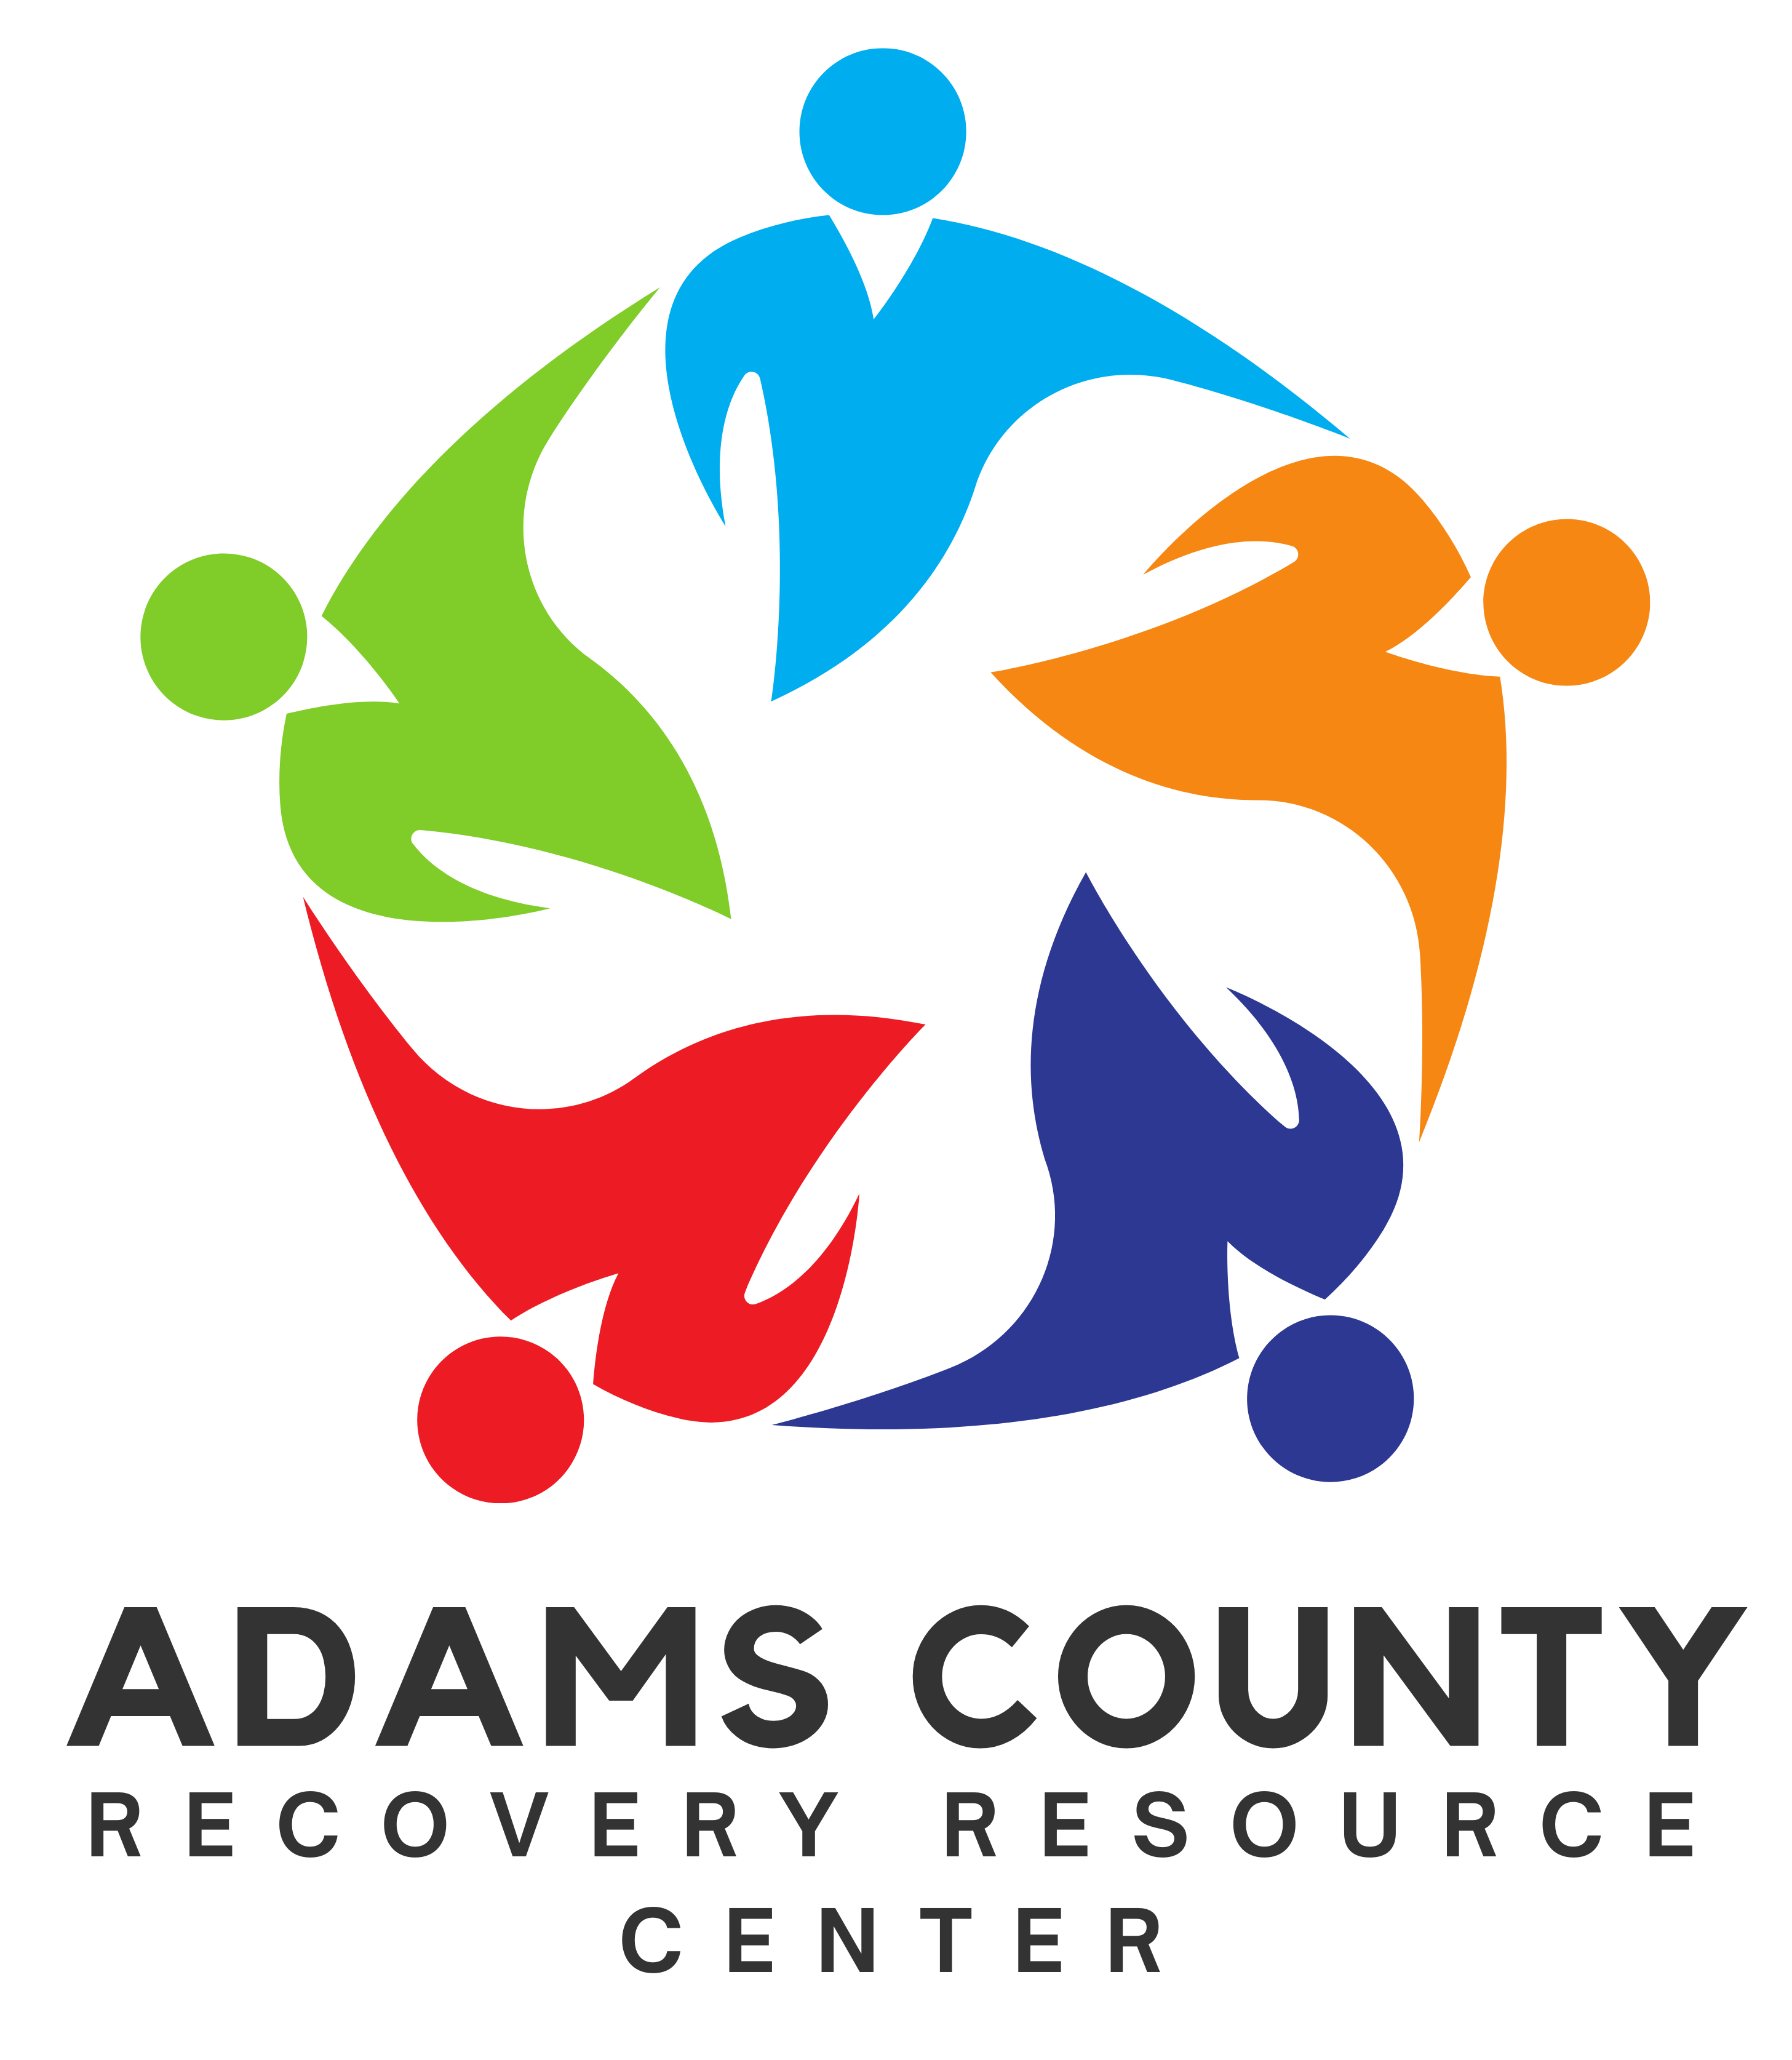 Adams County Recovery Resource Center